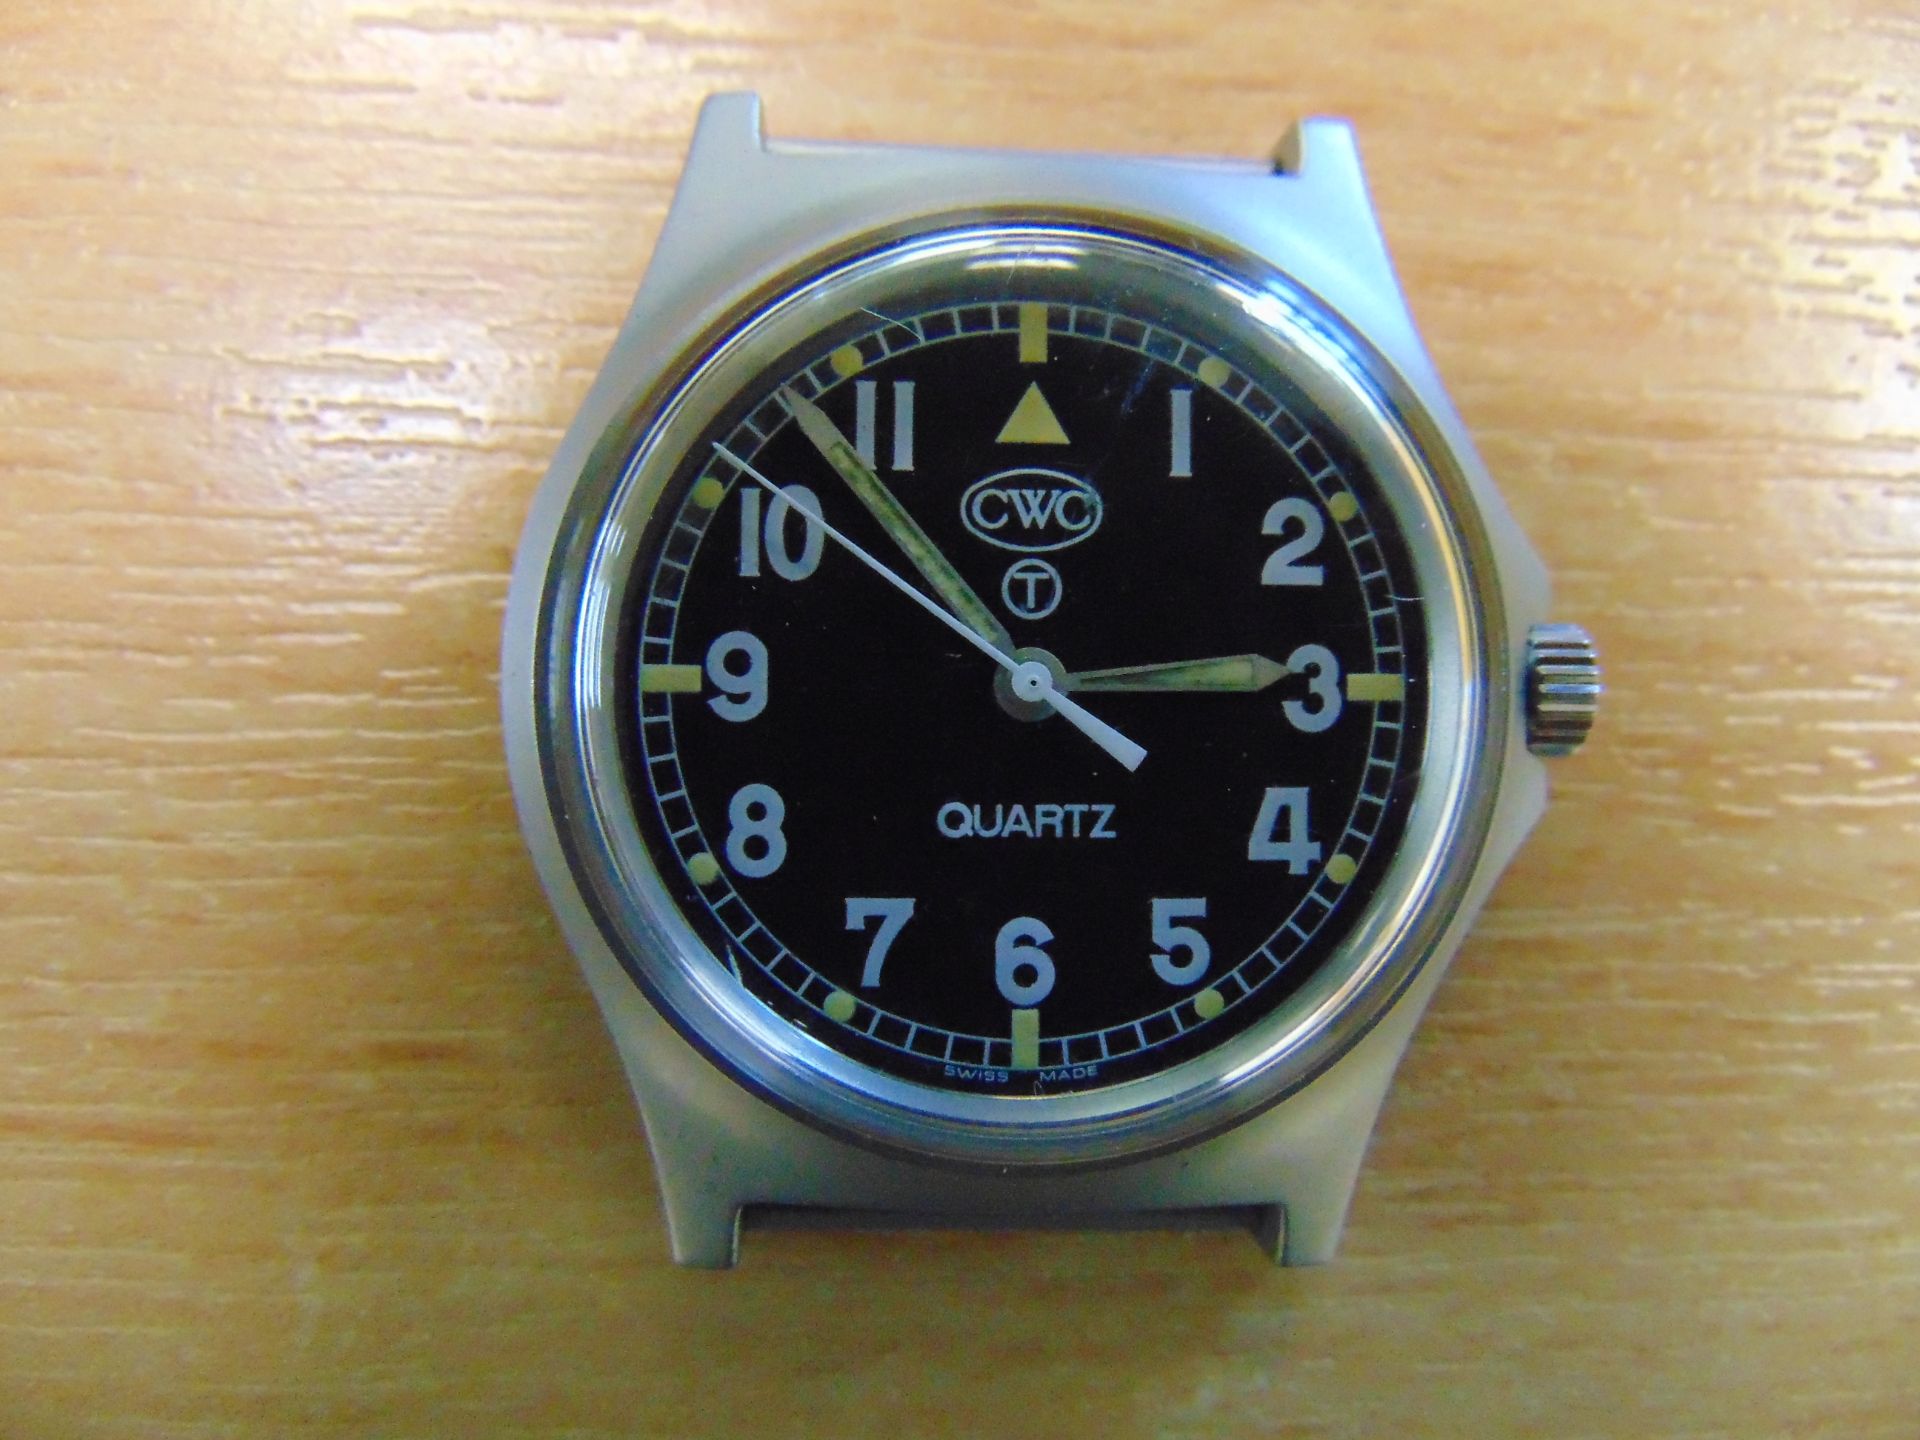 CWC W10 British Army Service Watch Unissued Condition, Water Resistant to 5ATM, Date 2005 - Image 3 of 6